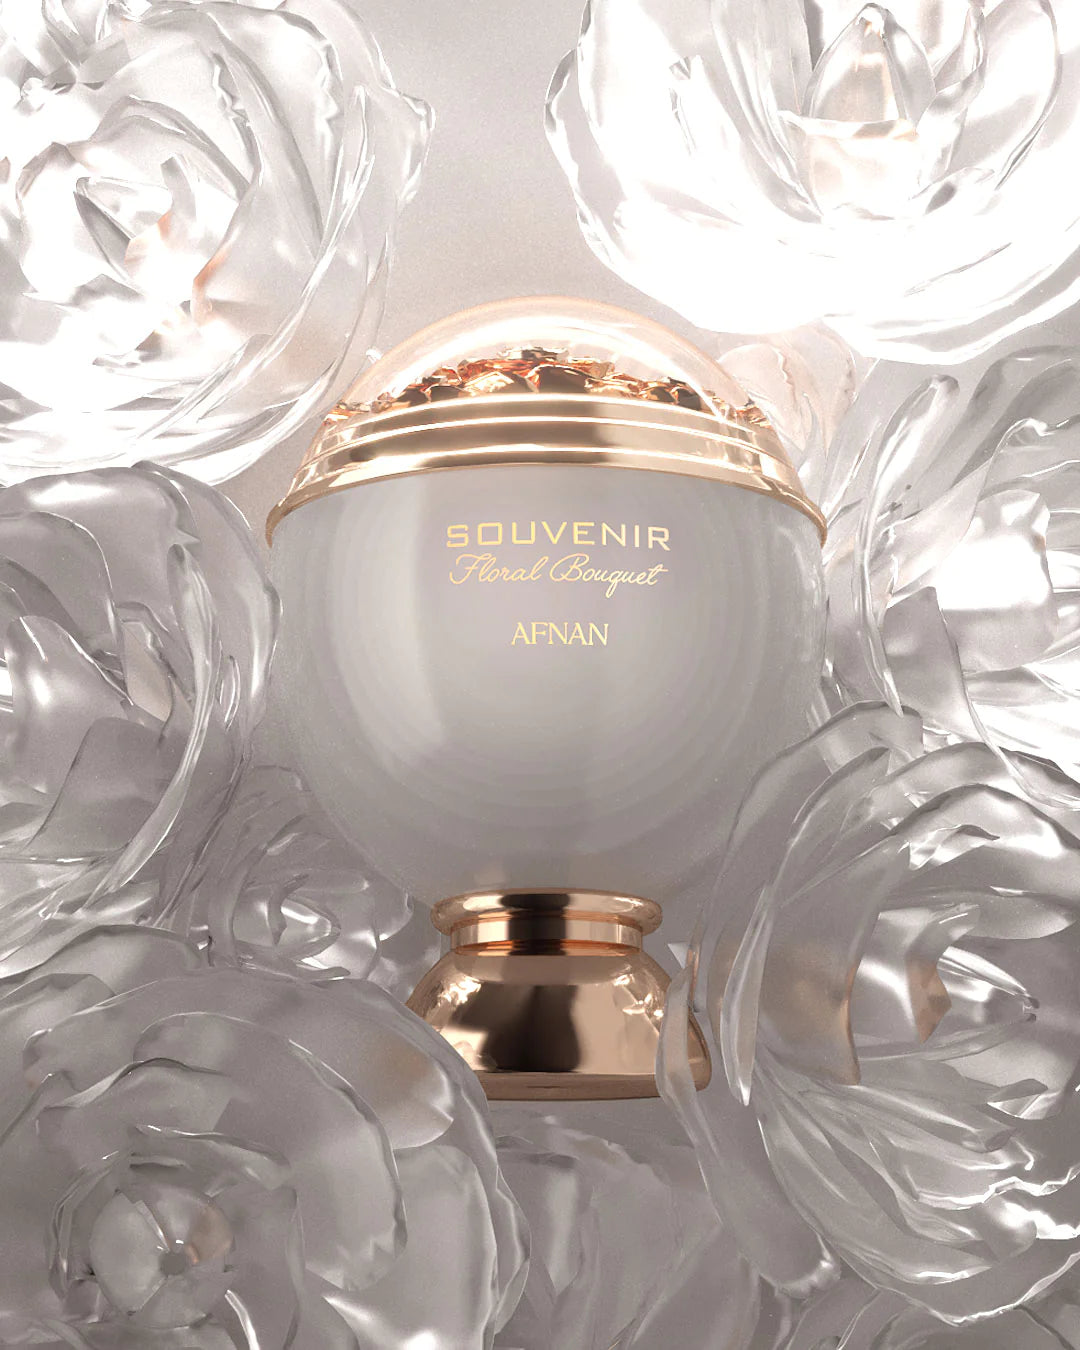 The image shows a perfume bottle with a clean and elegant design. The bottle has a spherical white body with a golden band that reads "SOUVENIR Floral Bouquet AFNAN." Above the band is a clear dome, encasing what appears to be a cluster of golden petals or flakes, giving a sense of luxury. The bottle rests on a golden pedestal base that complements the golden accents.